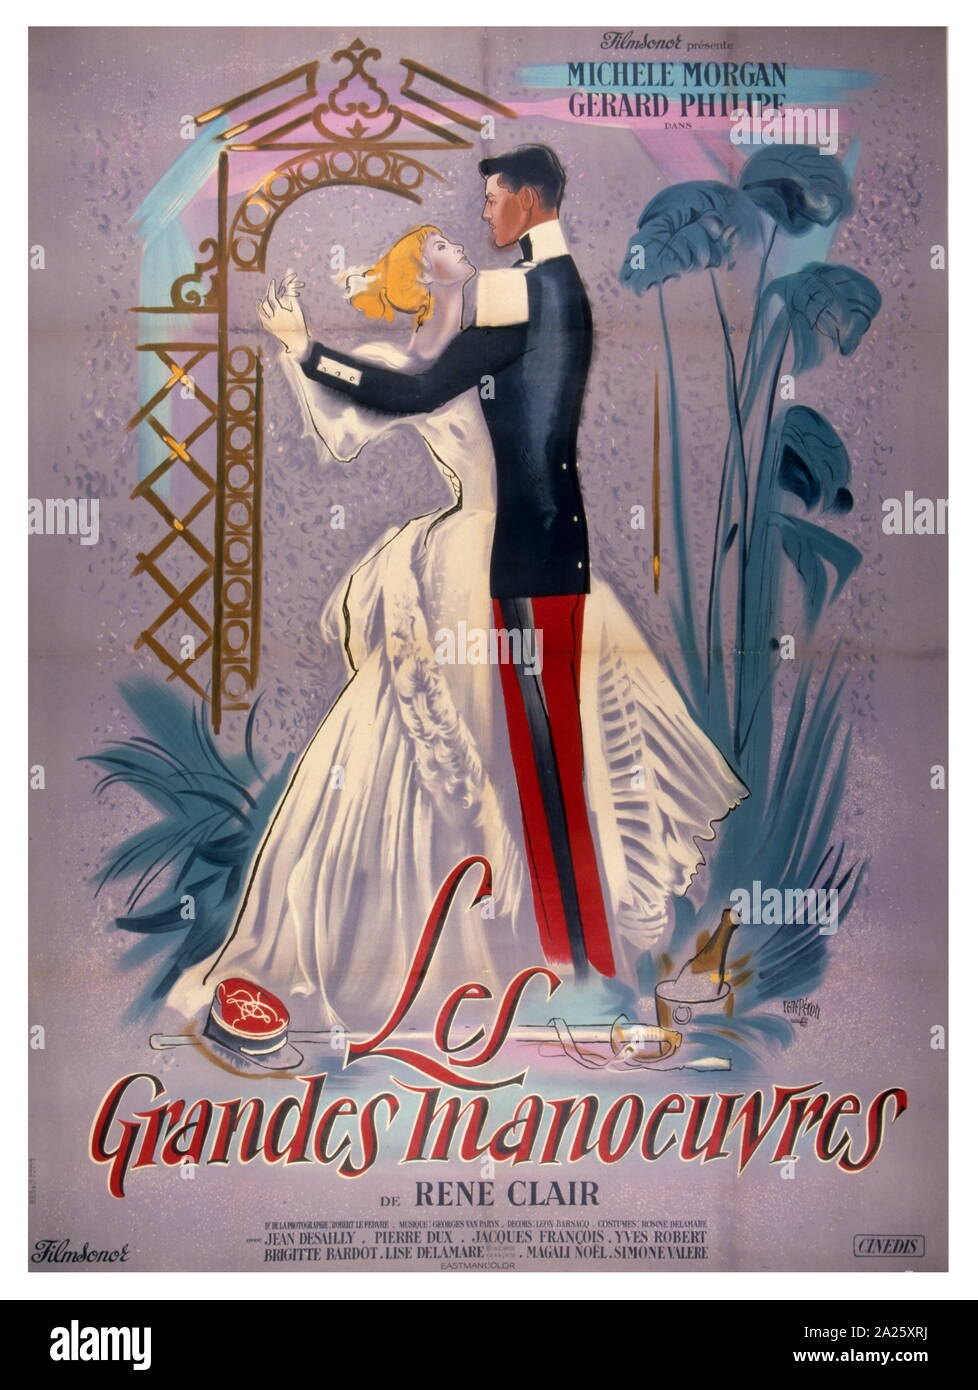 French Film Poster for 'The Grand Manoeuvre' (Les Grandes Manoeuvres), a 1955 French drama film written and directed by Rene Clair, and starring Michele Morgan and Gerard Philipe. The Grand Manoeuvre. It is a romantic comedy-drama set in a French provincial town just before World War I, and it was Rene Clair's first film to be made in colour. Stock Photo